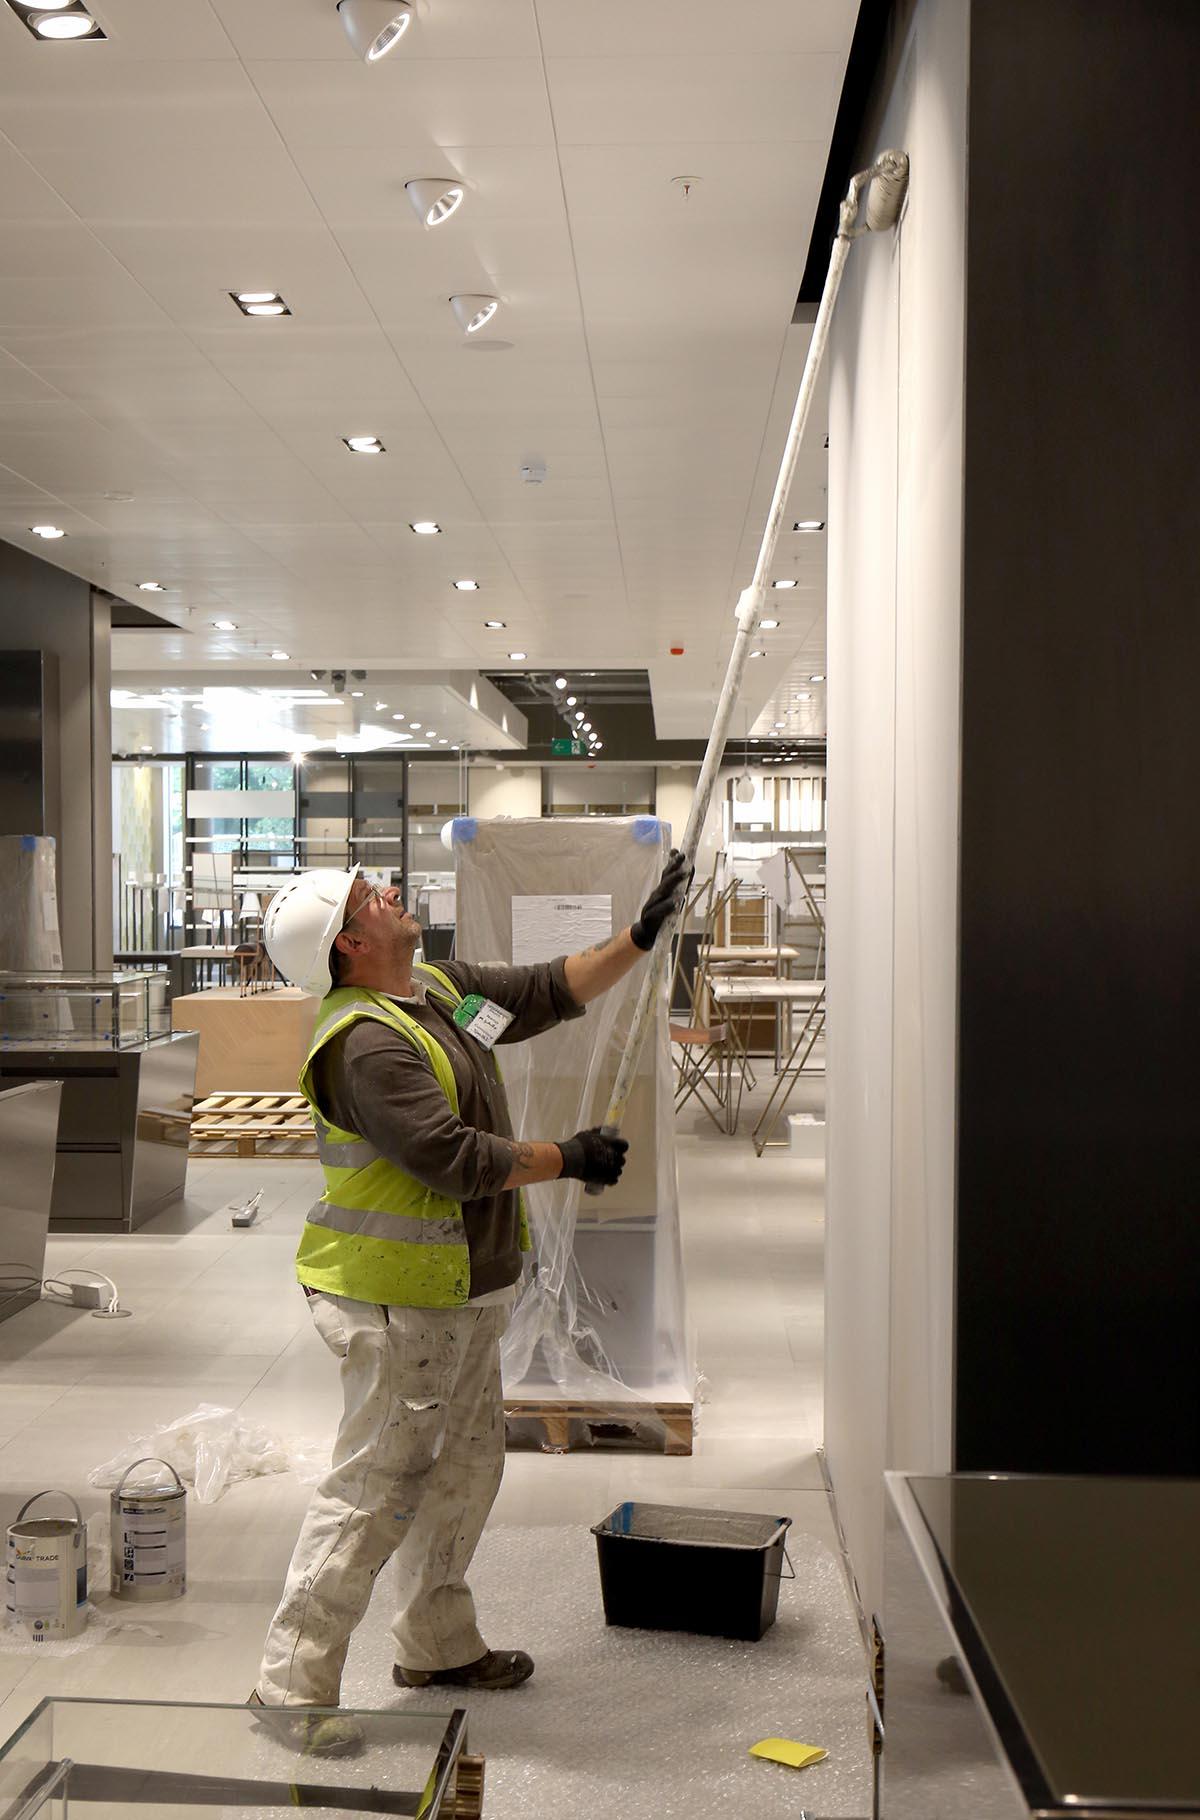 Inside images of the Westgate's new John Lewis